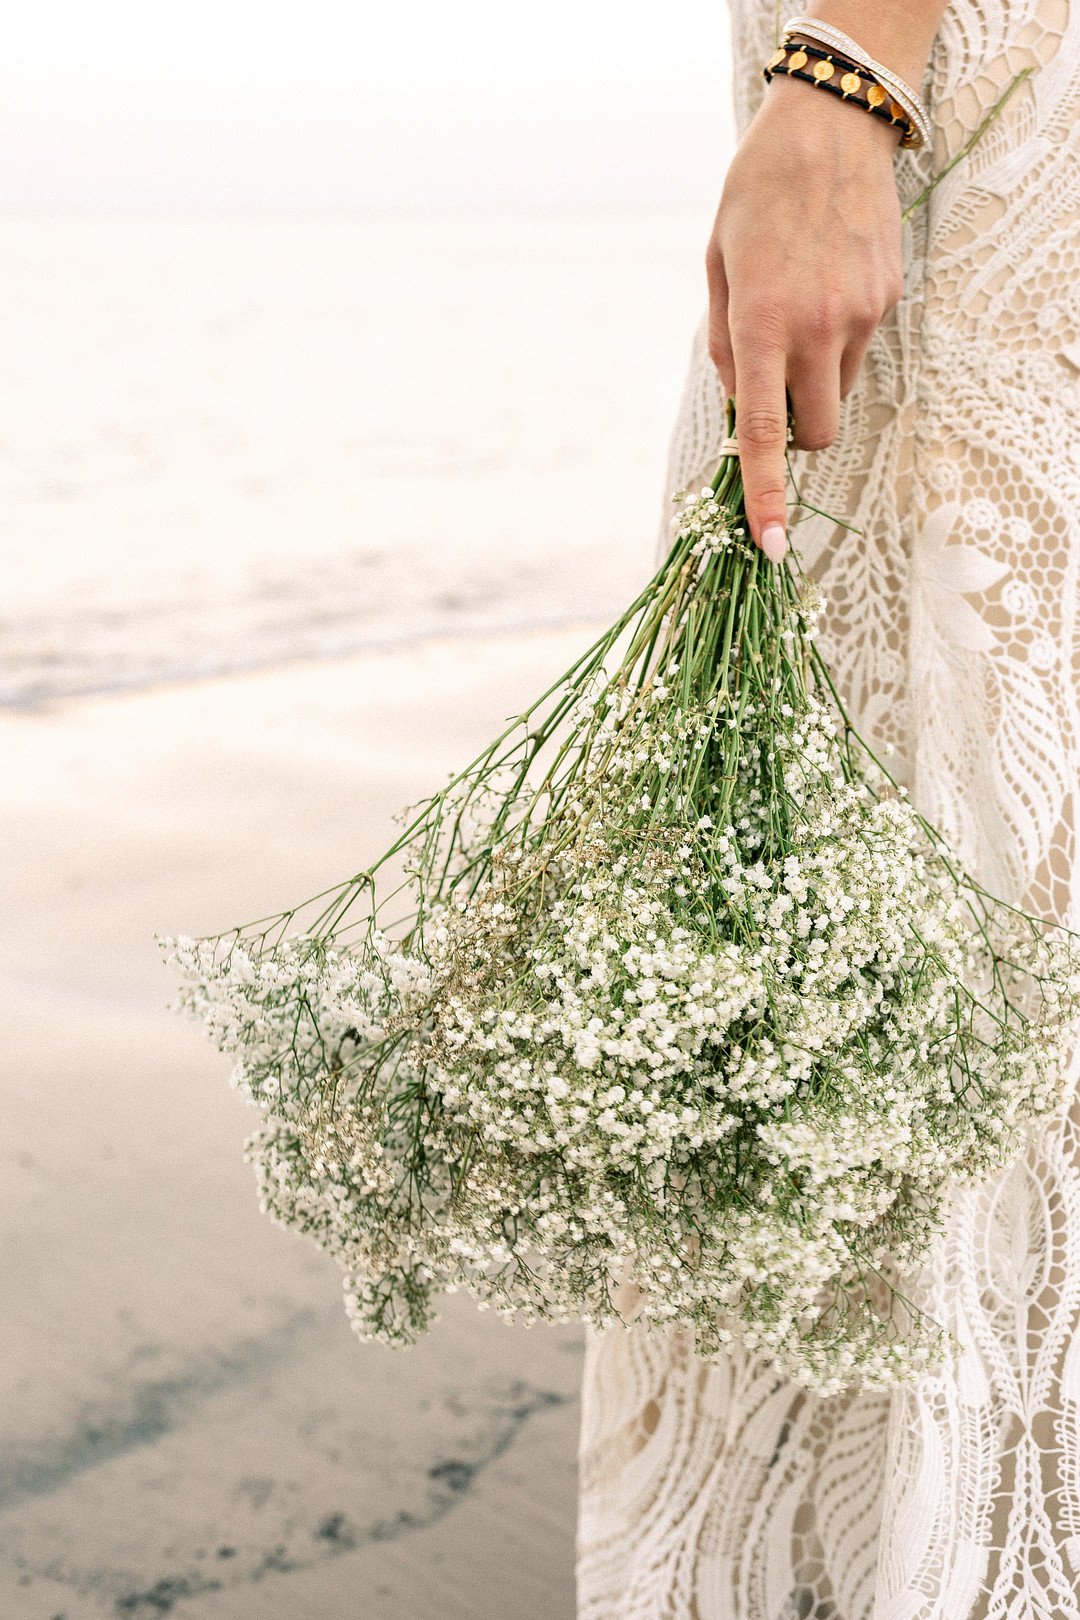 A beachy bridal moment_Carly Terry Photography_AW BRIDAL-1495_low.jpg